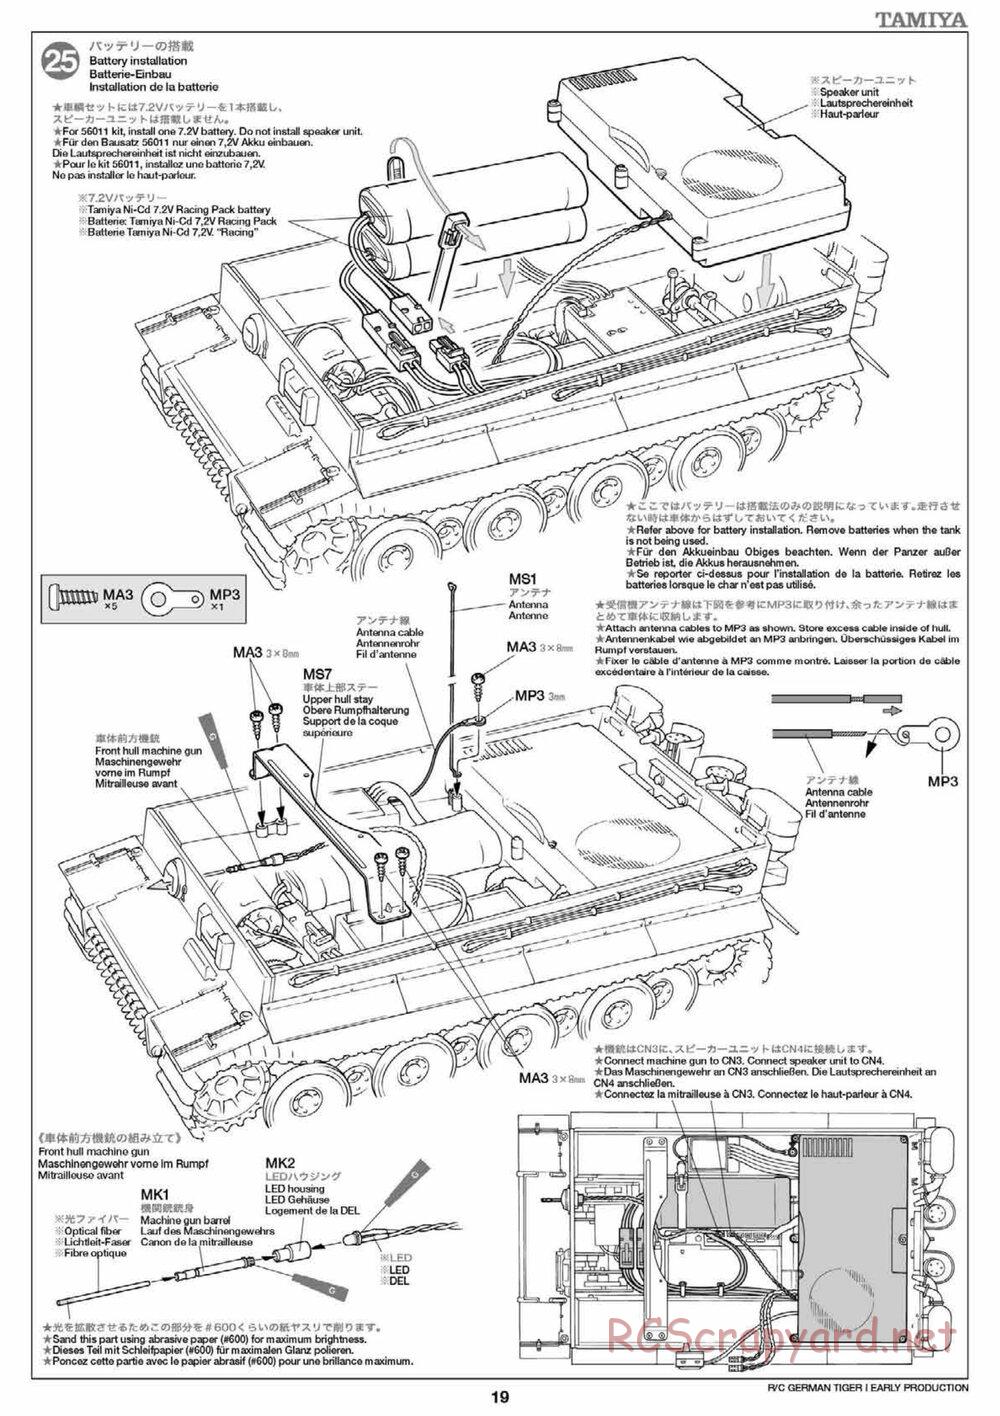 Tamiya - Tiger I Early Production - 1/16 Scale Chassis - Manual - Page 19